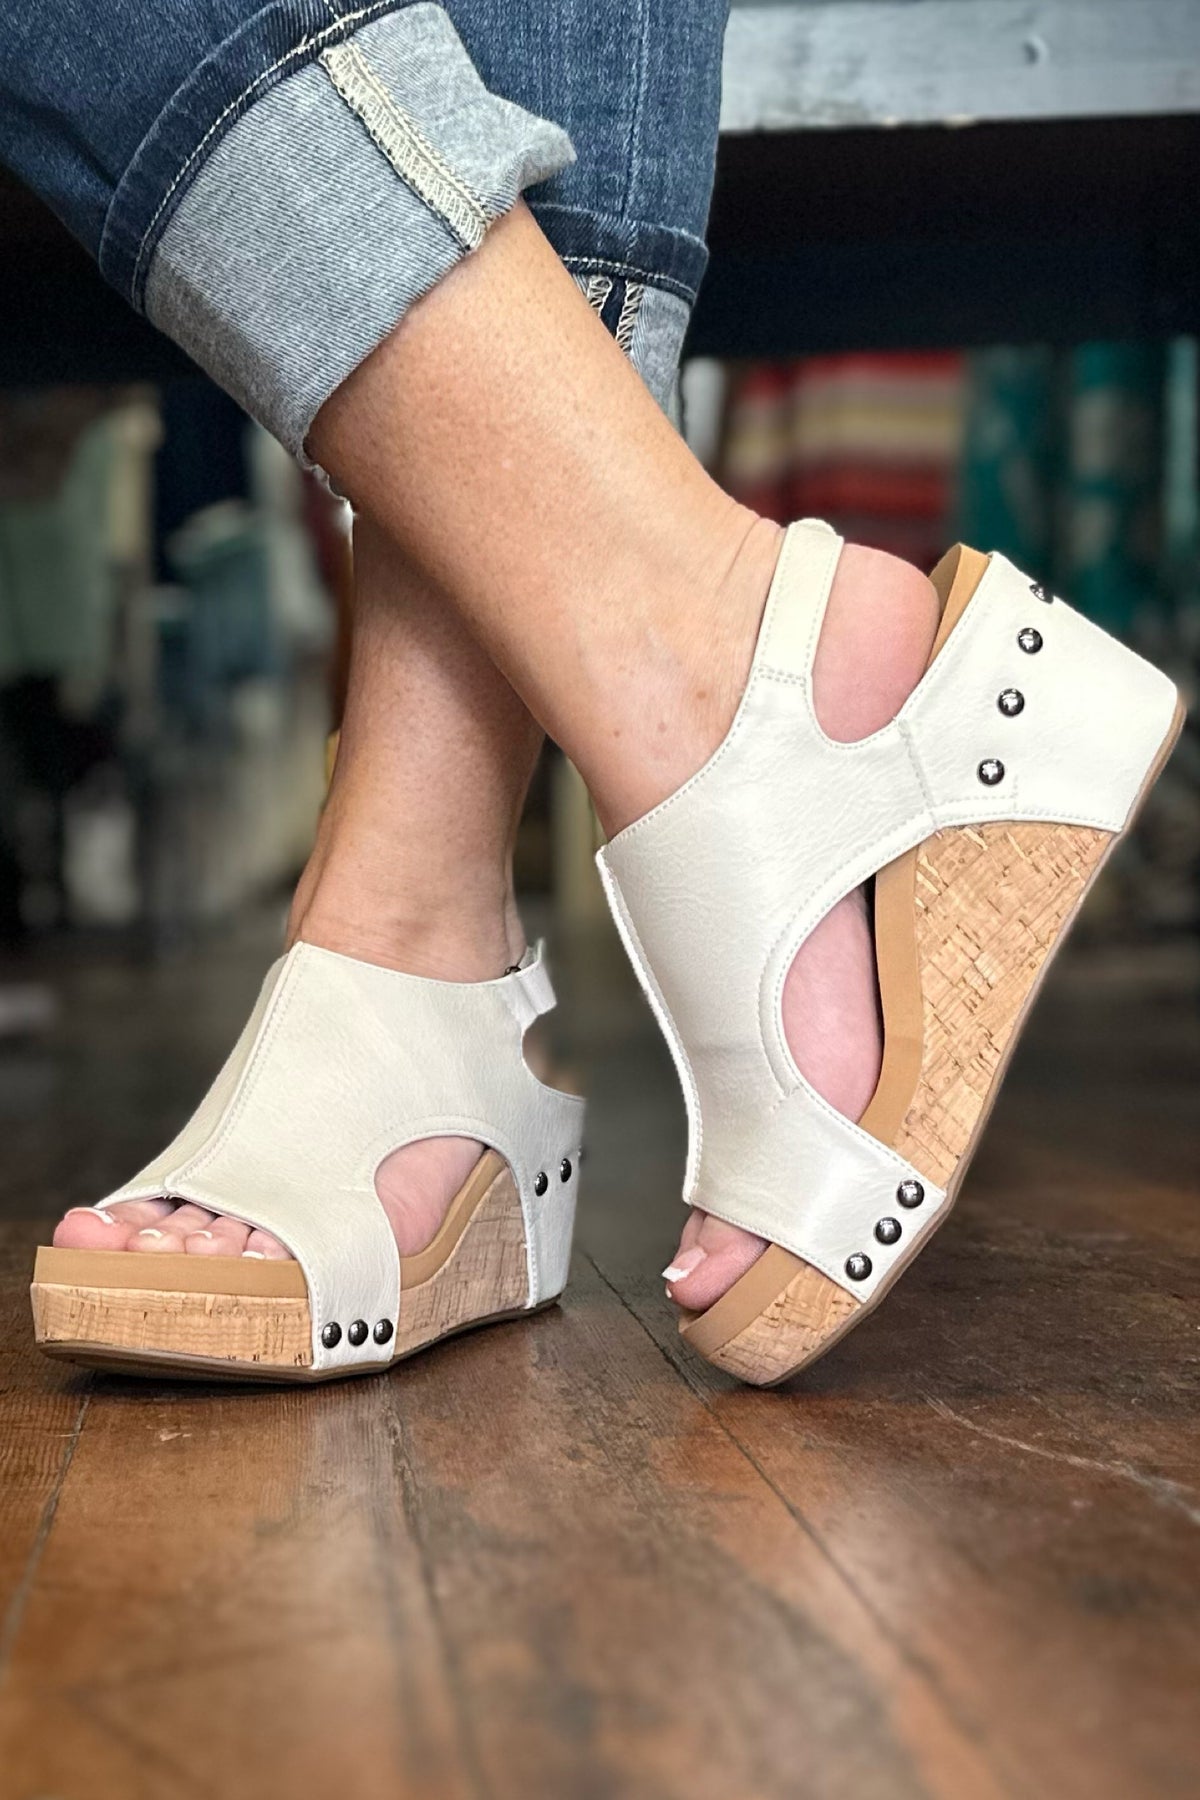 CARLEY By Corkys Cream Wedge-Women's Shoes-Corkys-Gallop 'n Glitz- Women's Western Wear Boutique, Located in Grants Pass, Oregon